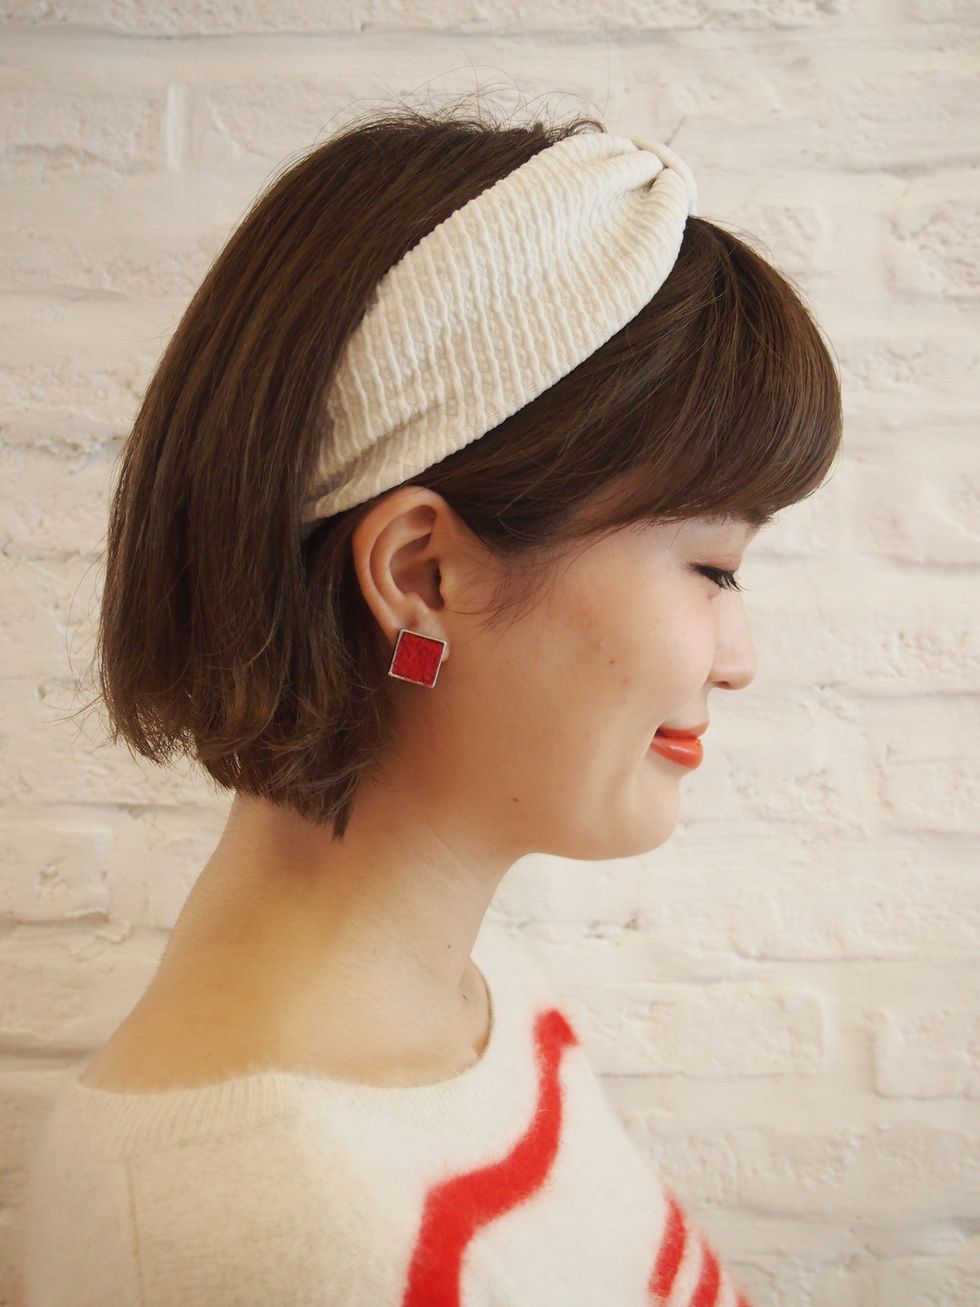 Ear, Lip, Hairstyle, Chin, Forehead, Hair accessory, Style, Fashion accessory, Jaw, Headpiece, 